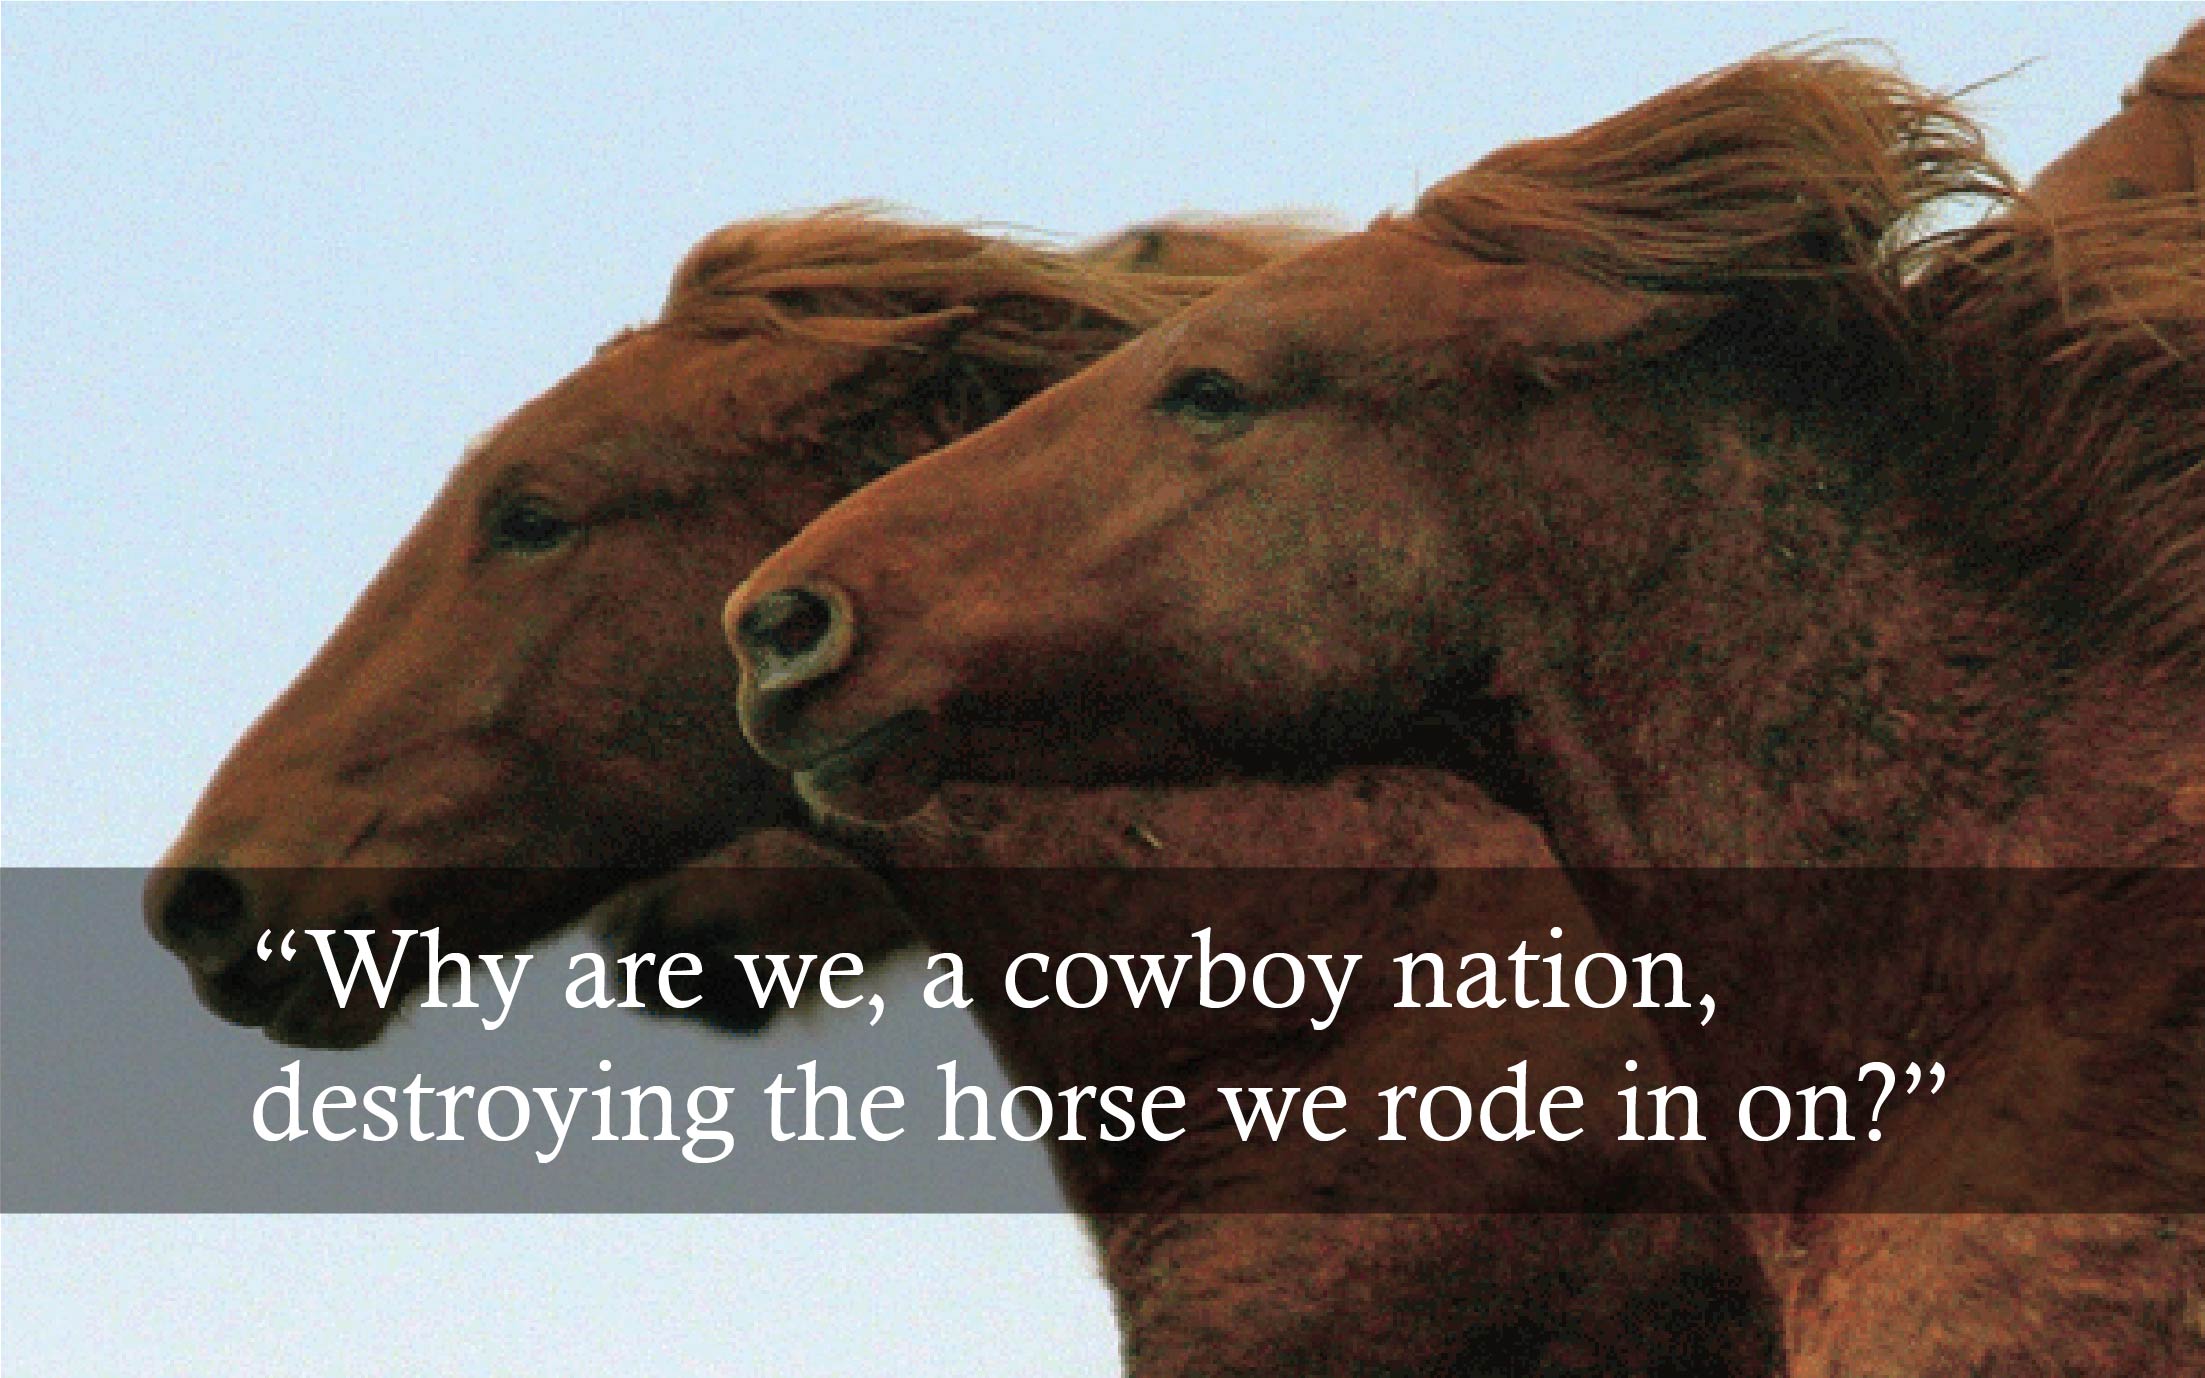 Test over horses reads, "what are we, a cowboy nation, killing the horses we rode in on.